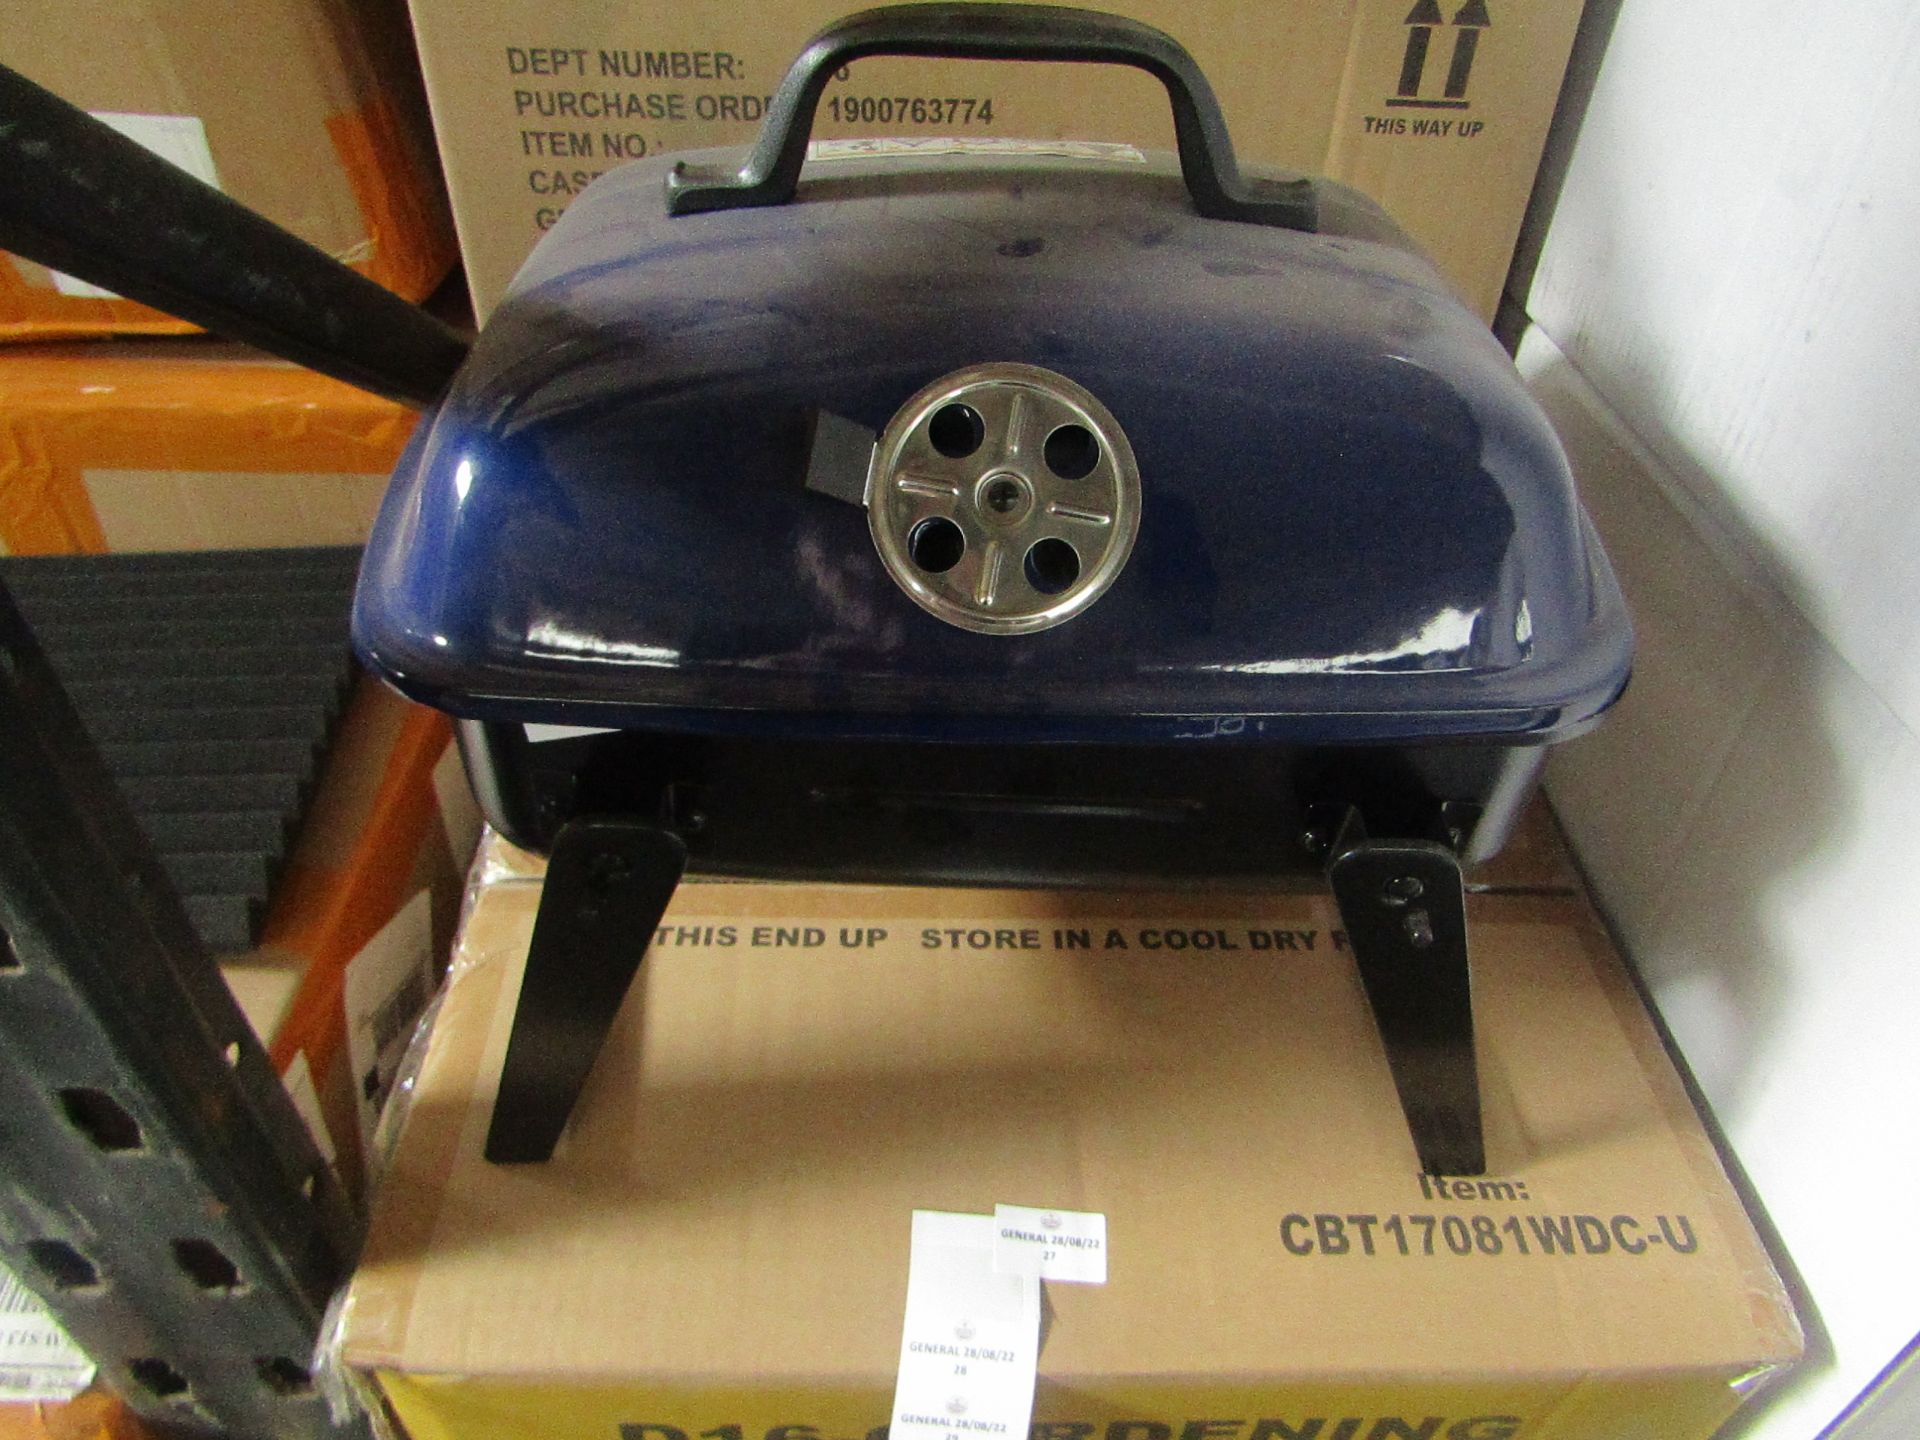 Expert Grill - Foldable Festival Grill - Blue - New & Boxed.